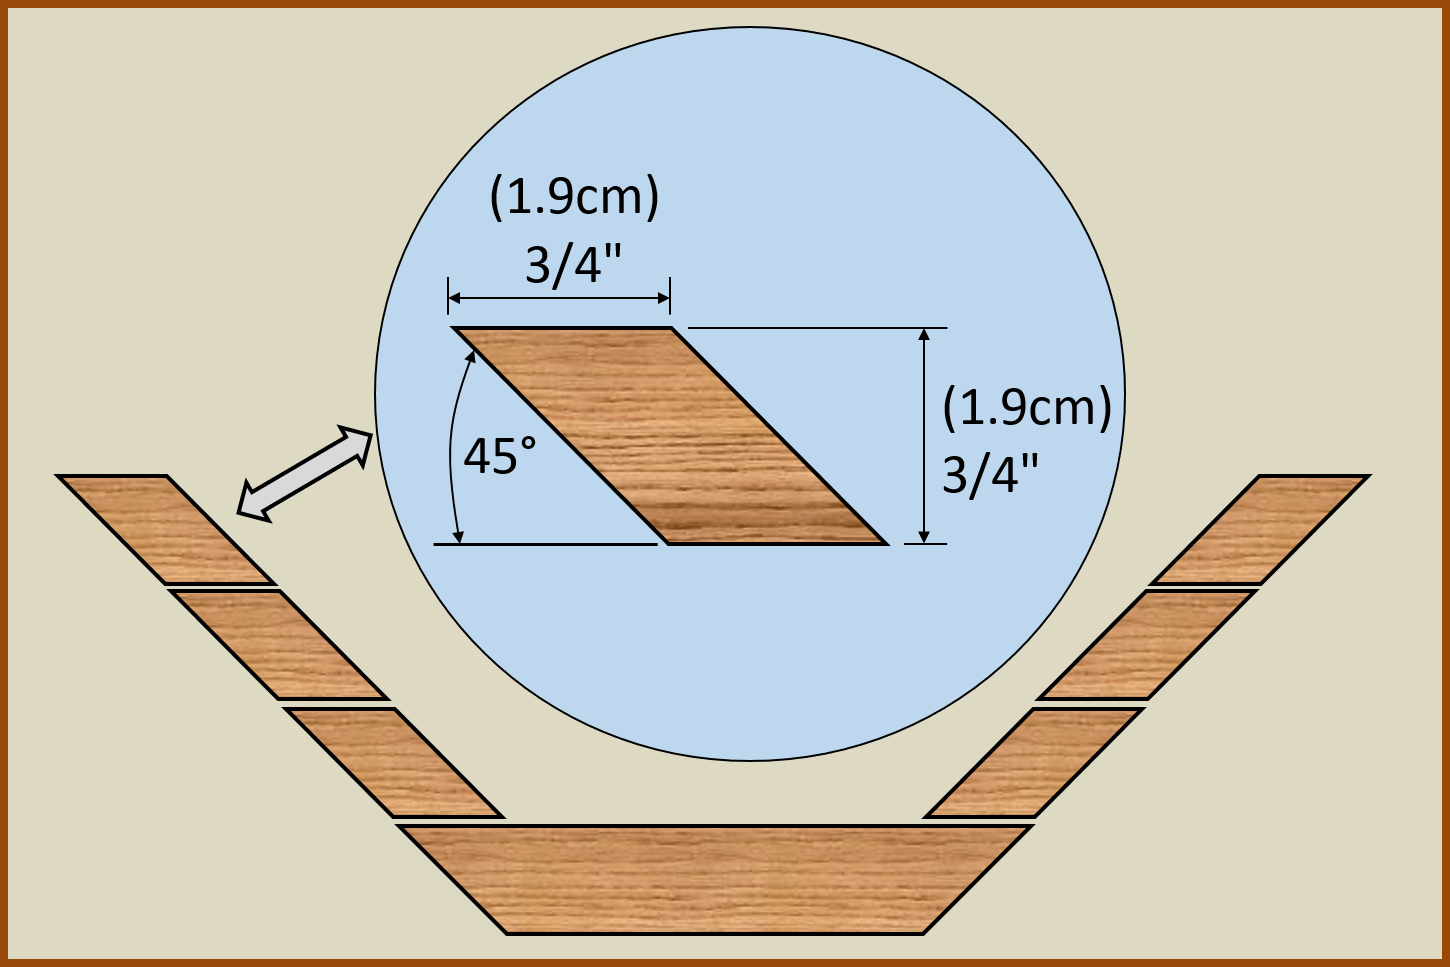 Figure 1: Dimensions of the segmented rings.